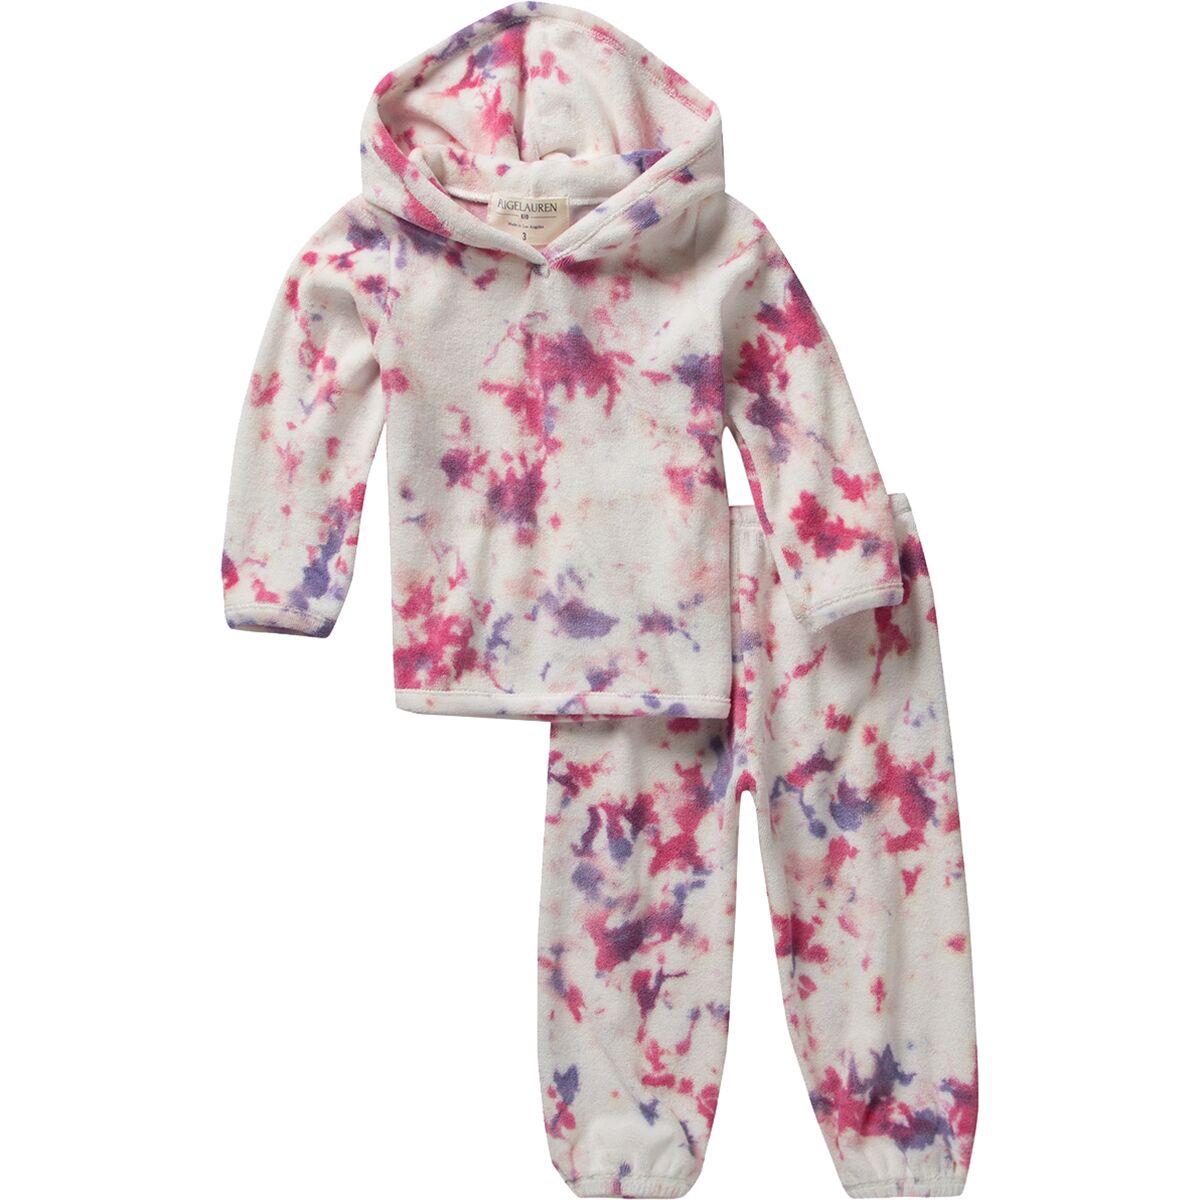 PaigeLauren French Terry Splatter Hoodie & Balloon Pant Set - Toddlers'